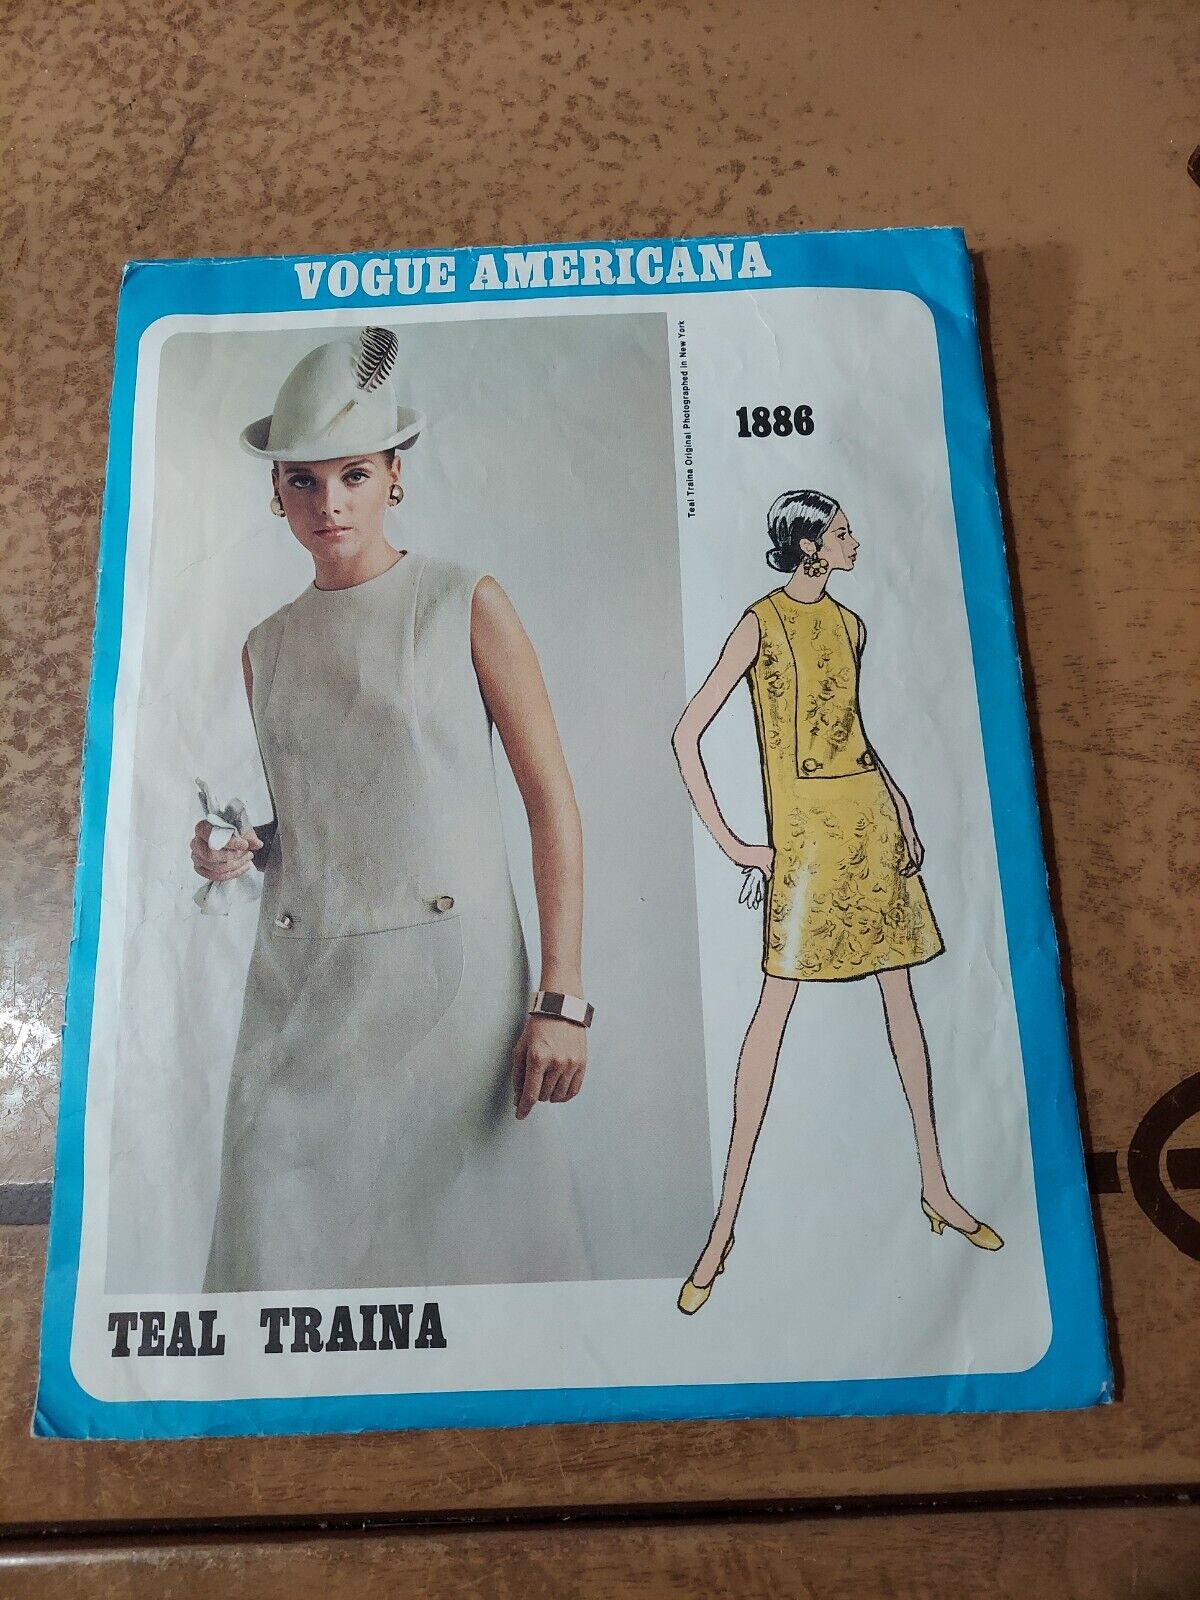 Vintage Vogue Americana 1886 Fancy Dress Pattern Size 16 Complete By Teal Traina